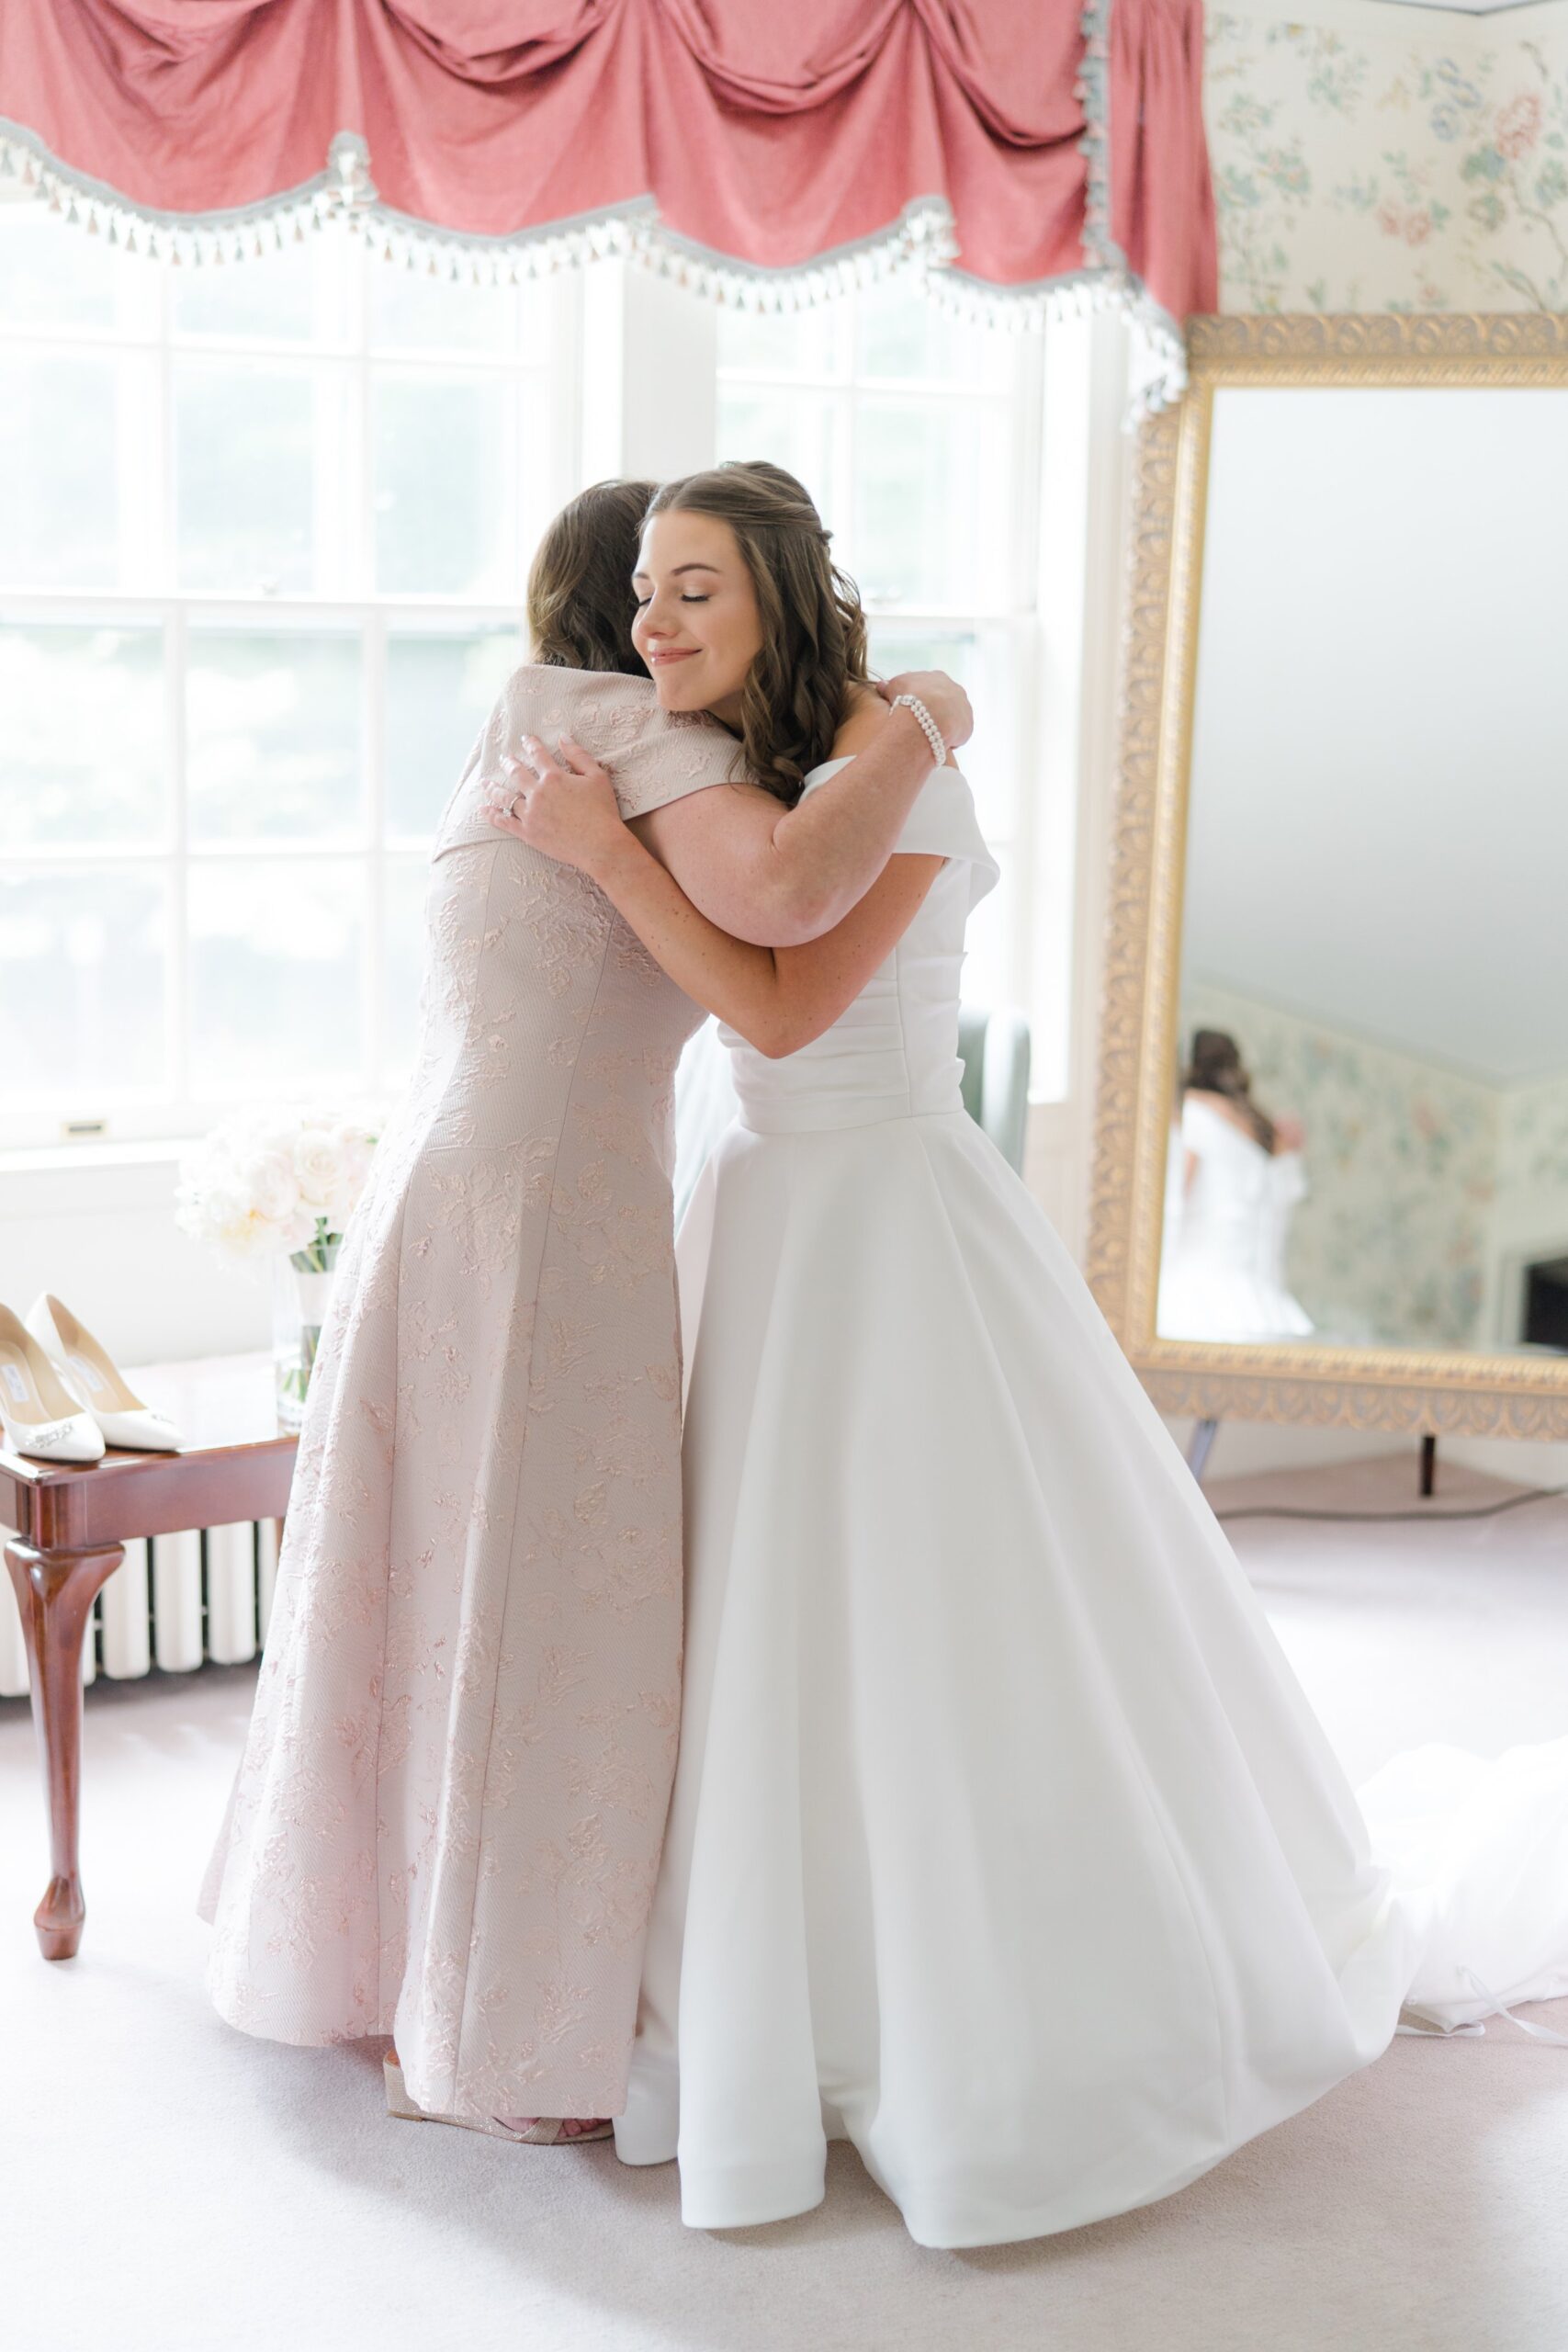 Mother of the bride shares hug with her daughter in the bridal suite at the Bradley Estate.